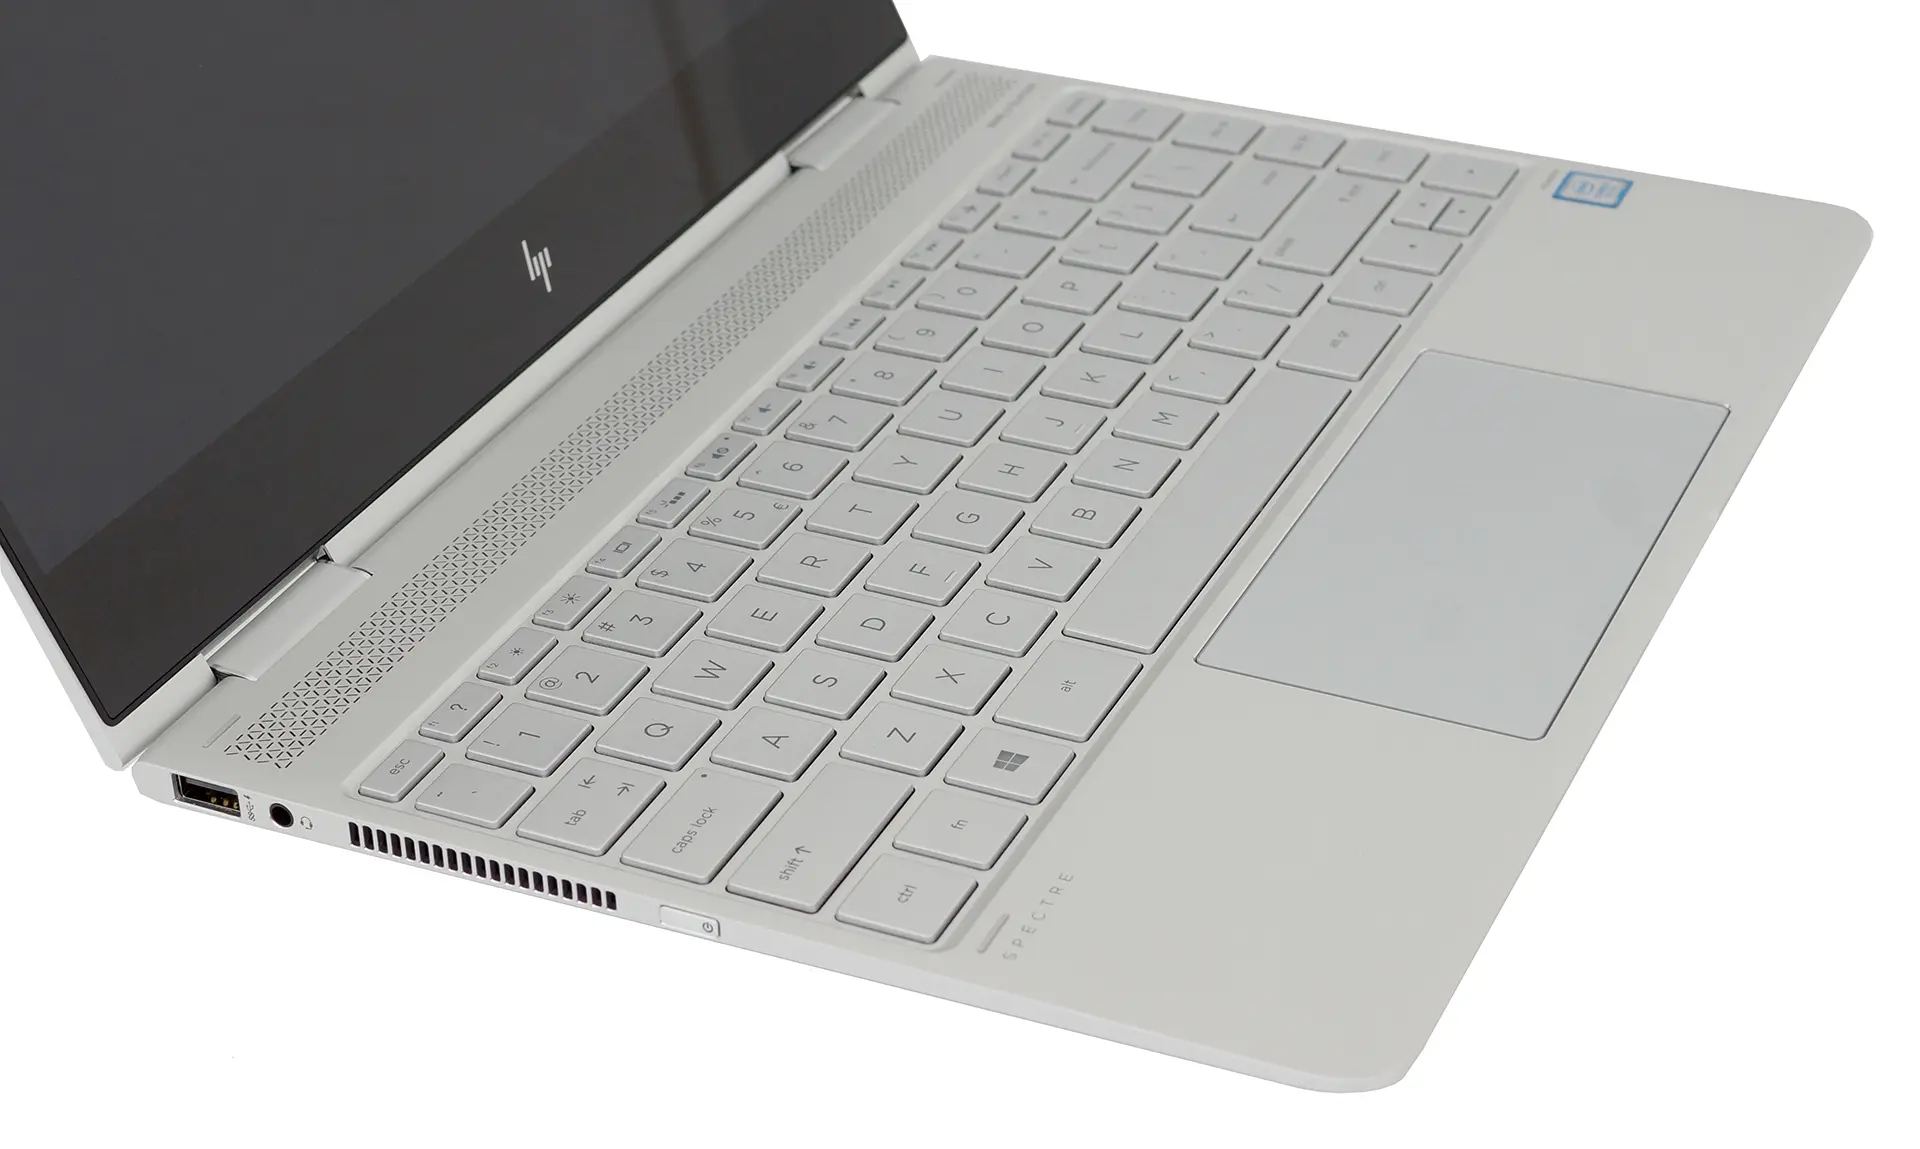 hewlett packard 8265ngw - Does the HP EliteBook 840 G5 have Bluetooth